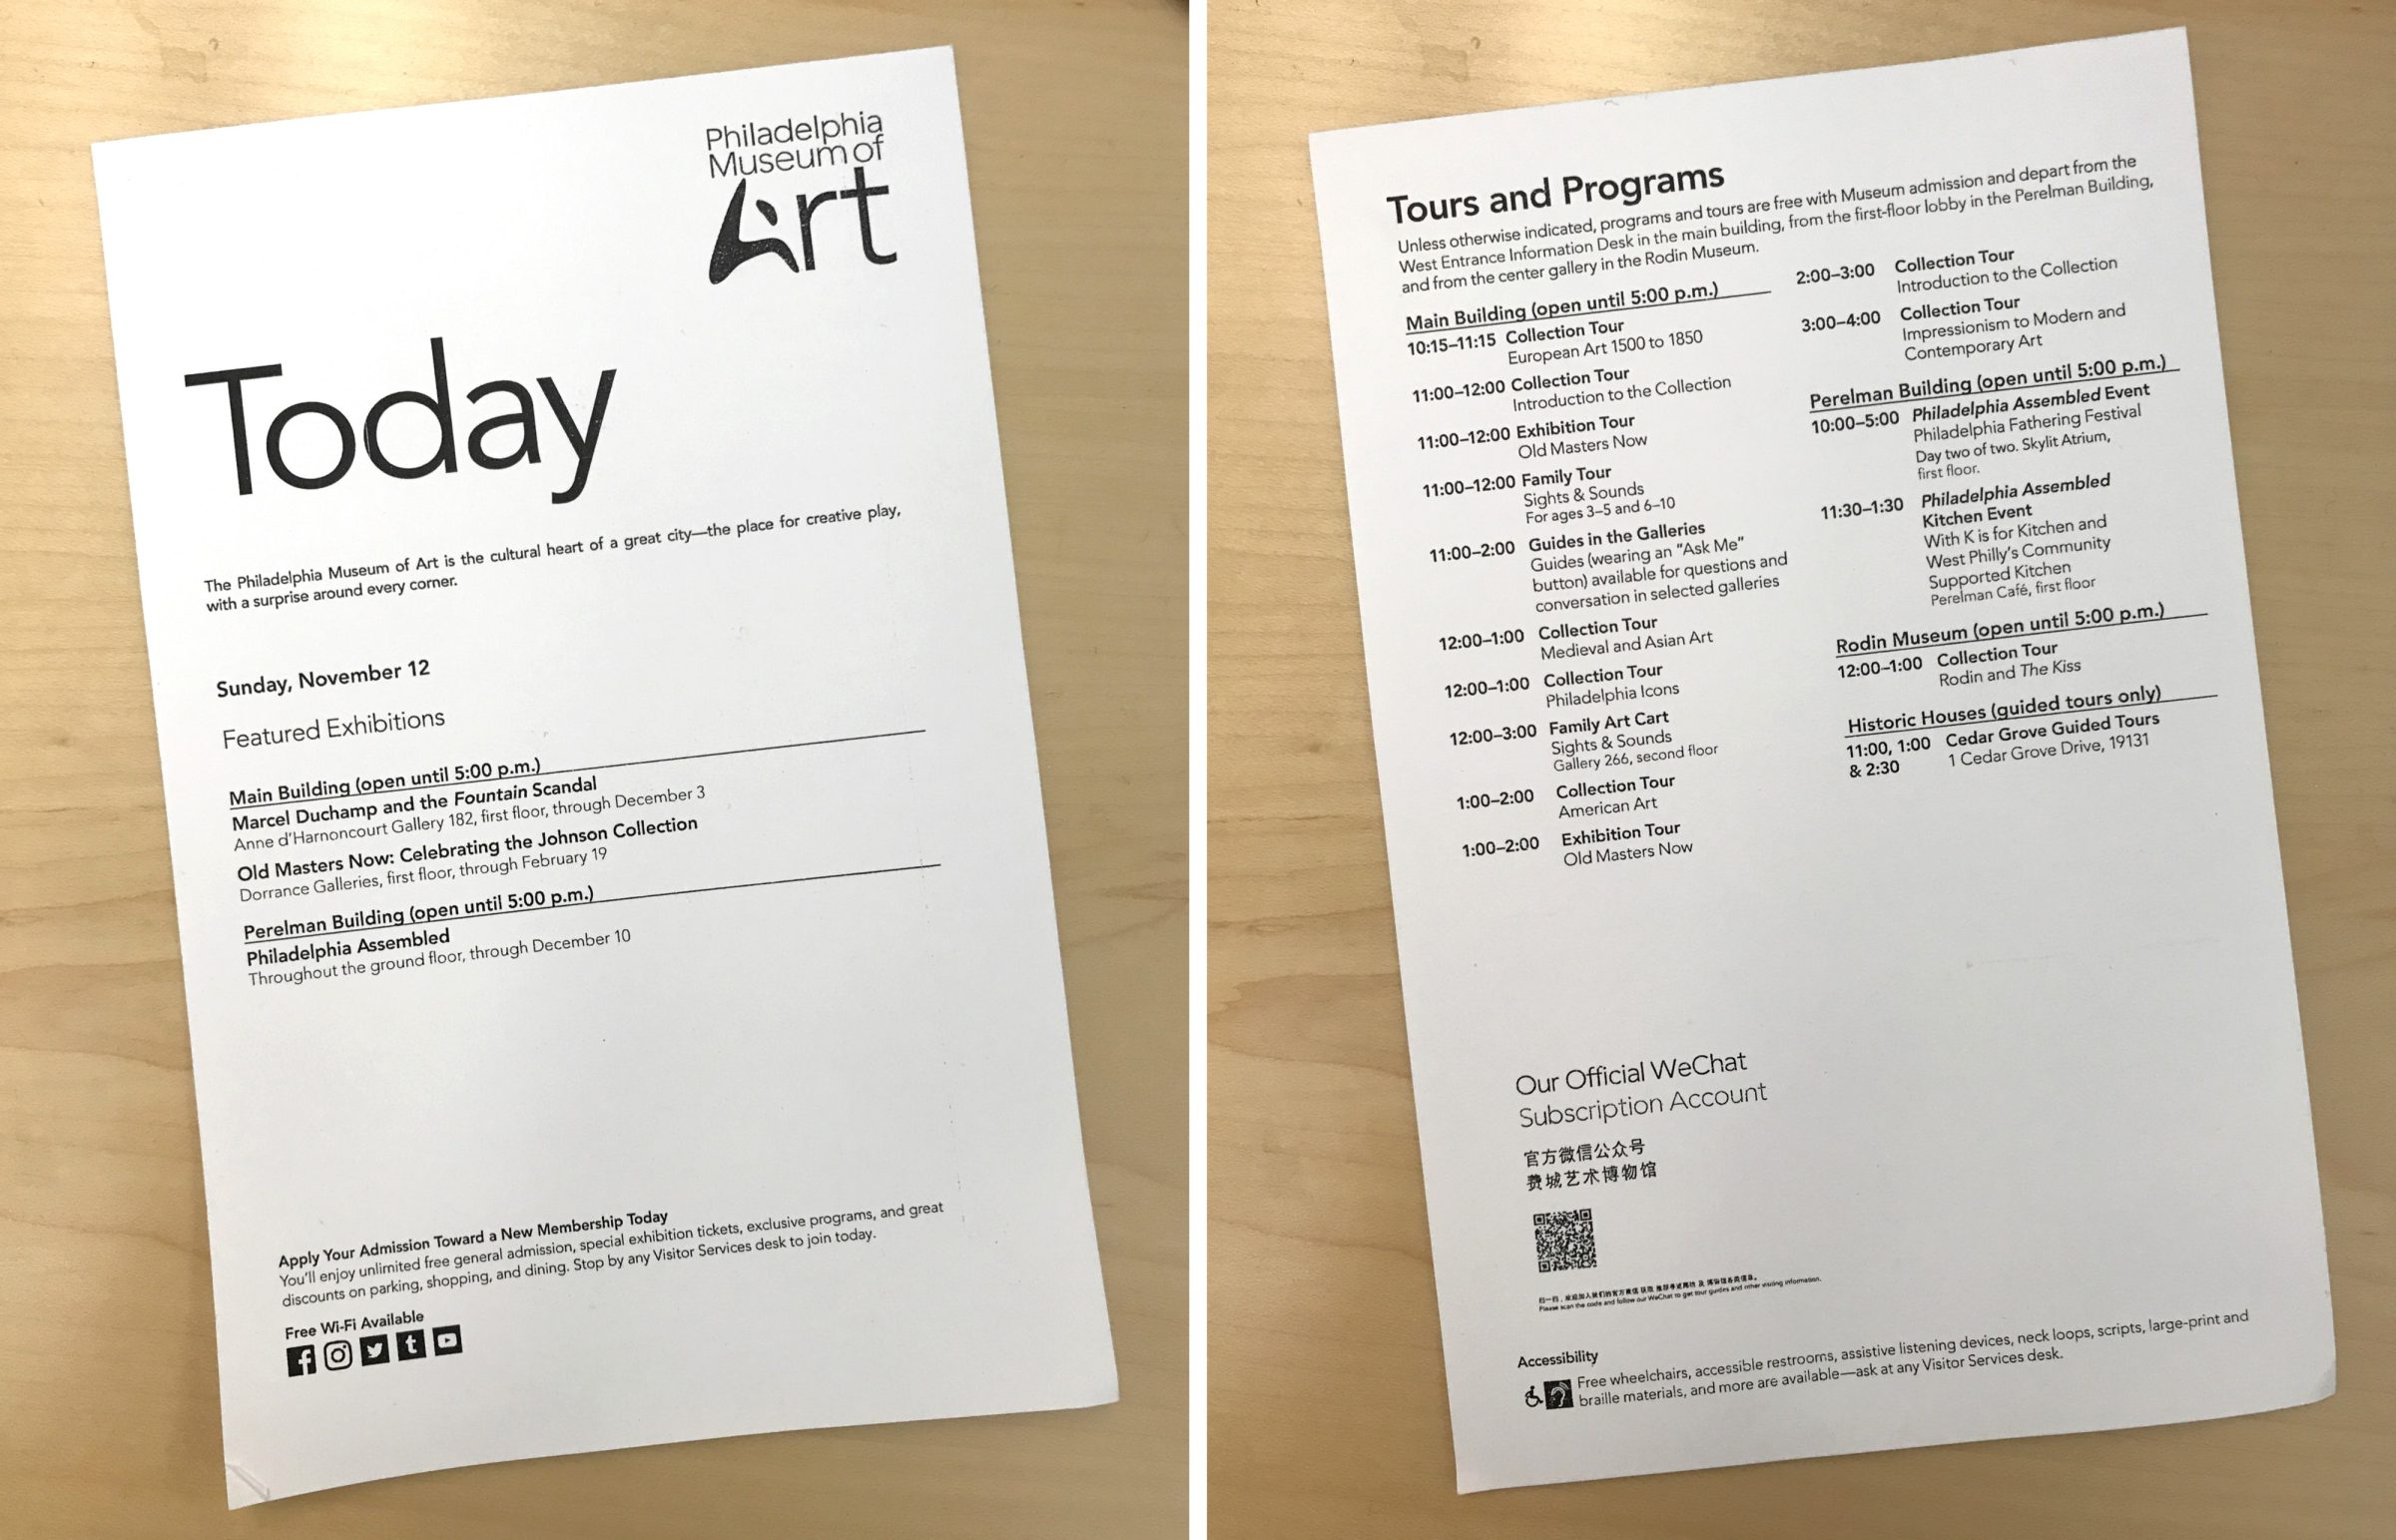 Diptych of the front and back of a paper pamphlet listing all the tours and programs at the Philadelphia Museum of Art today.